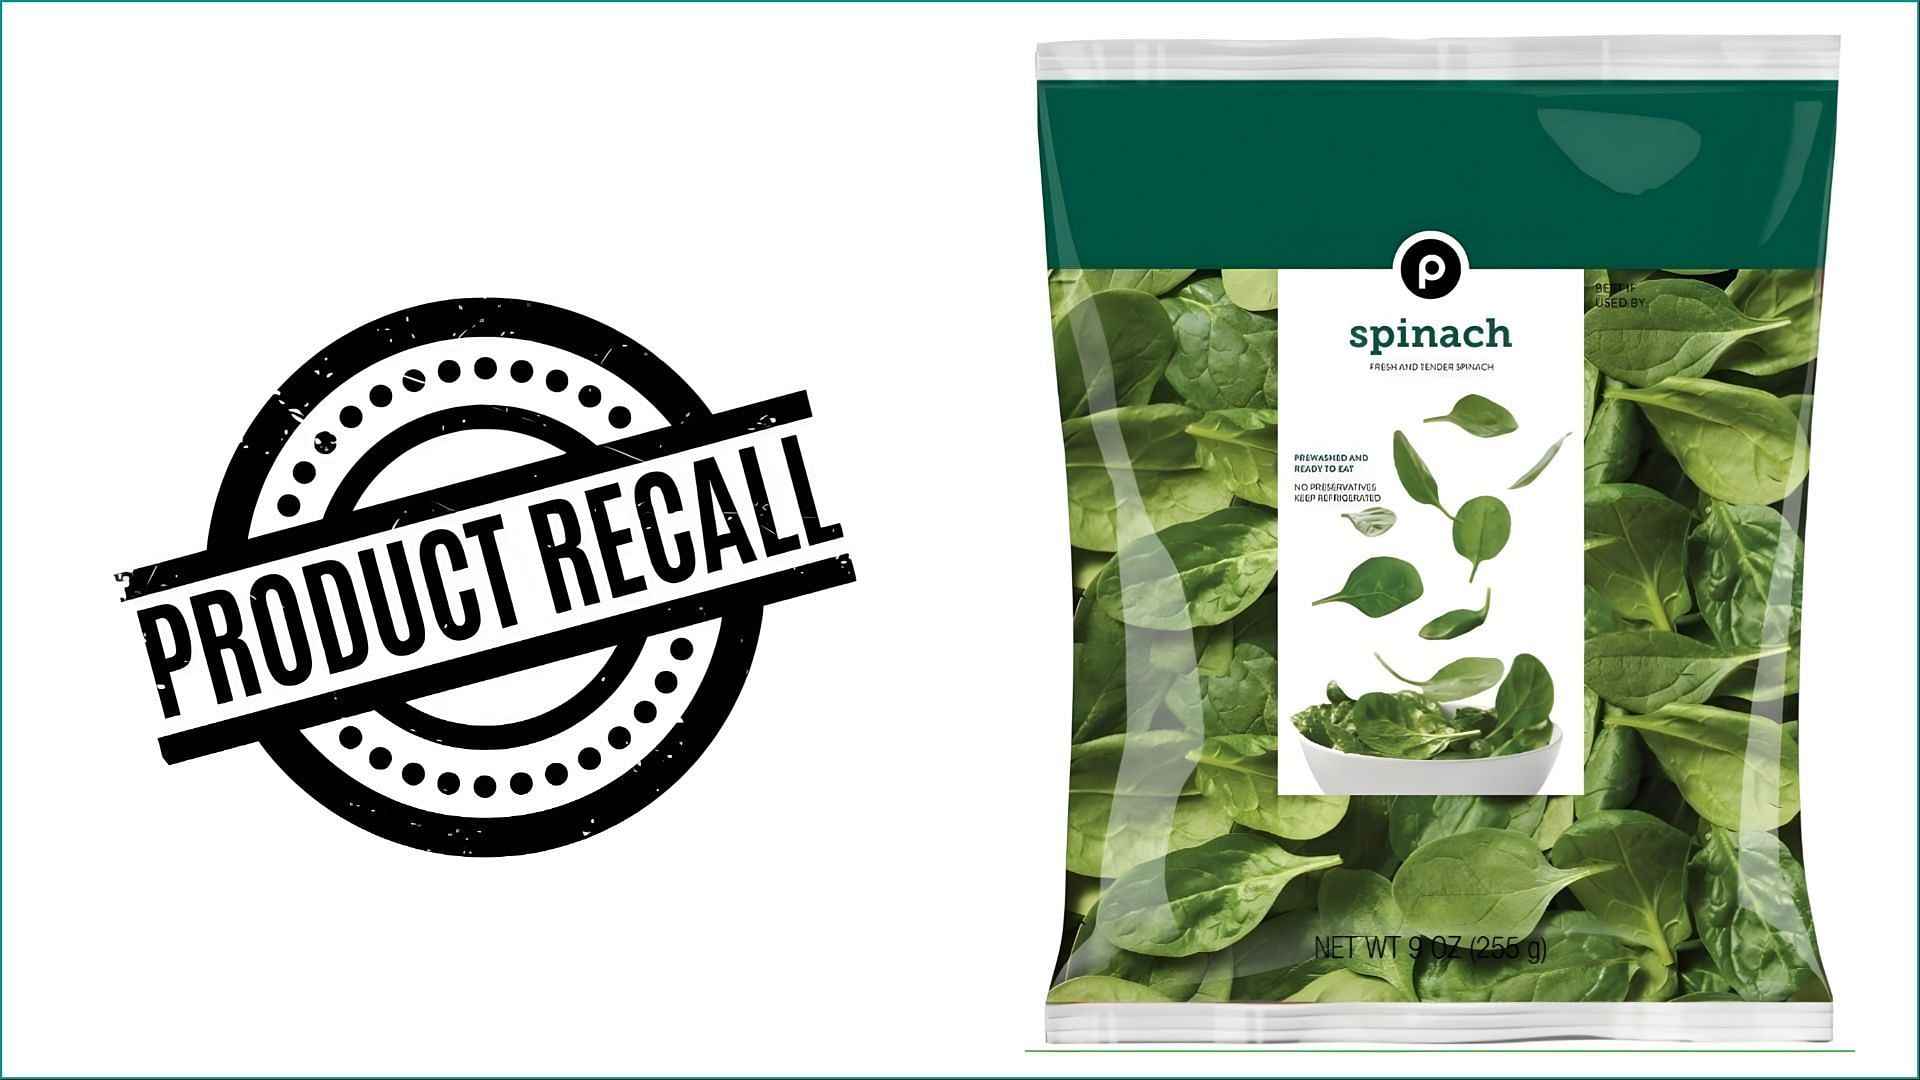 Fresh Express recalls spinach products over Listeria concerns (Image via Fresh Express)